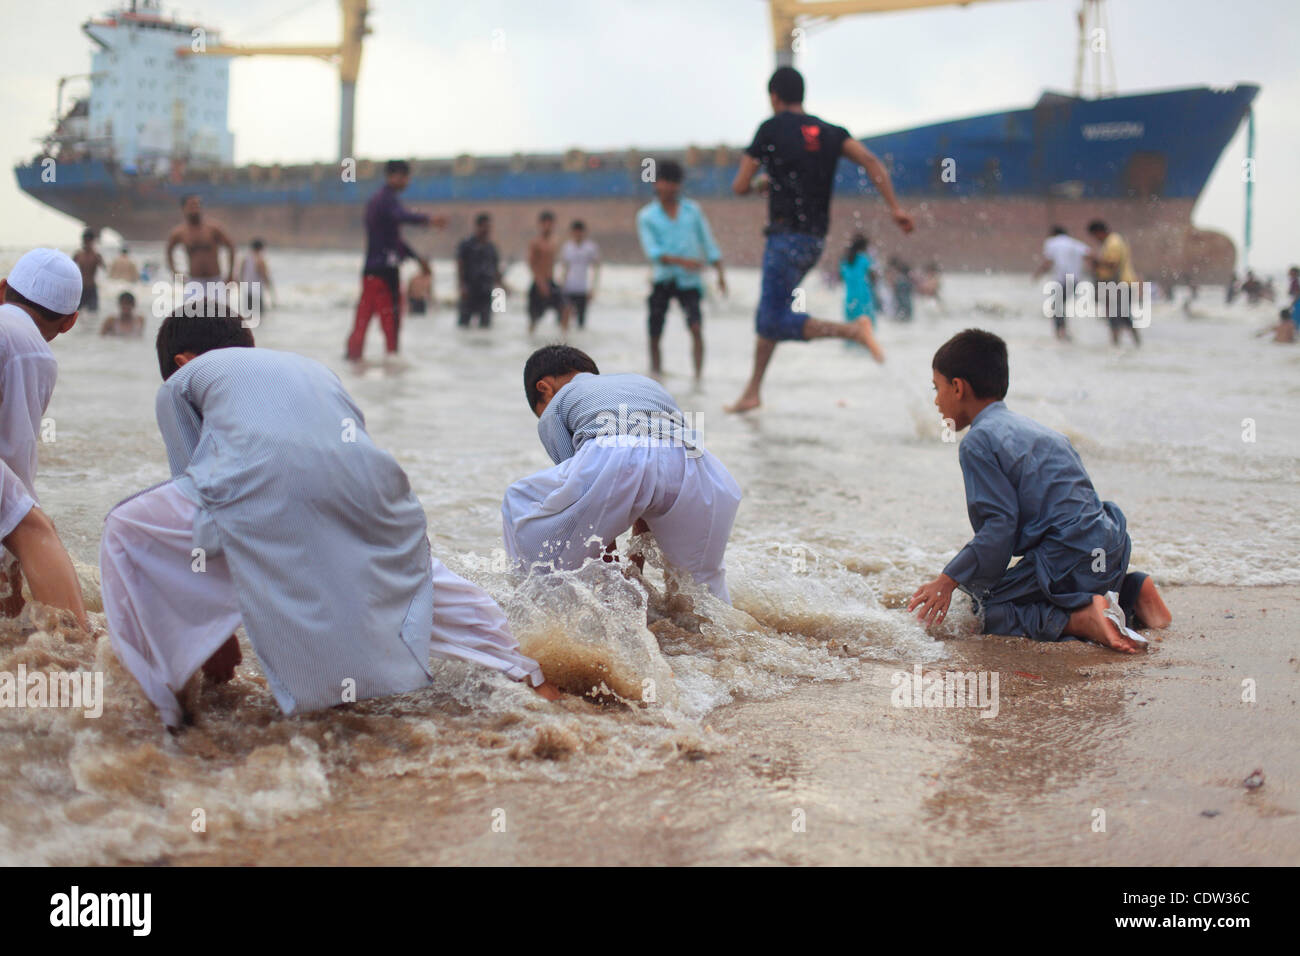 June 26, 2011 - Mumbai, India - An unusual sight greeted the monsoon revellers at the Juhu Chowpatty beach as the MV Wisdom, a merchant ship, has been grounded since June 11 after it broke loose from the towing tug and drifted ashore while it was being towed away to Alang shipyard to be broken down  Stock Photo